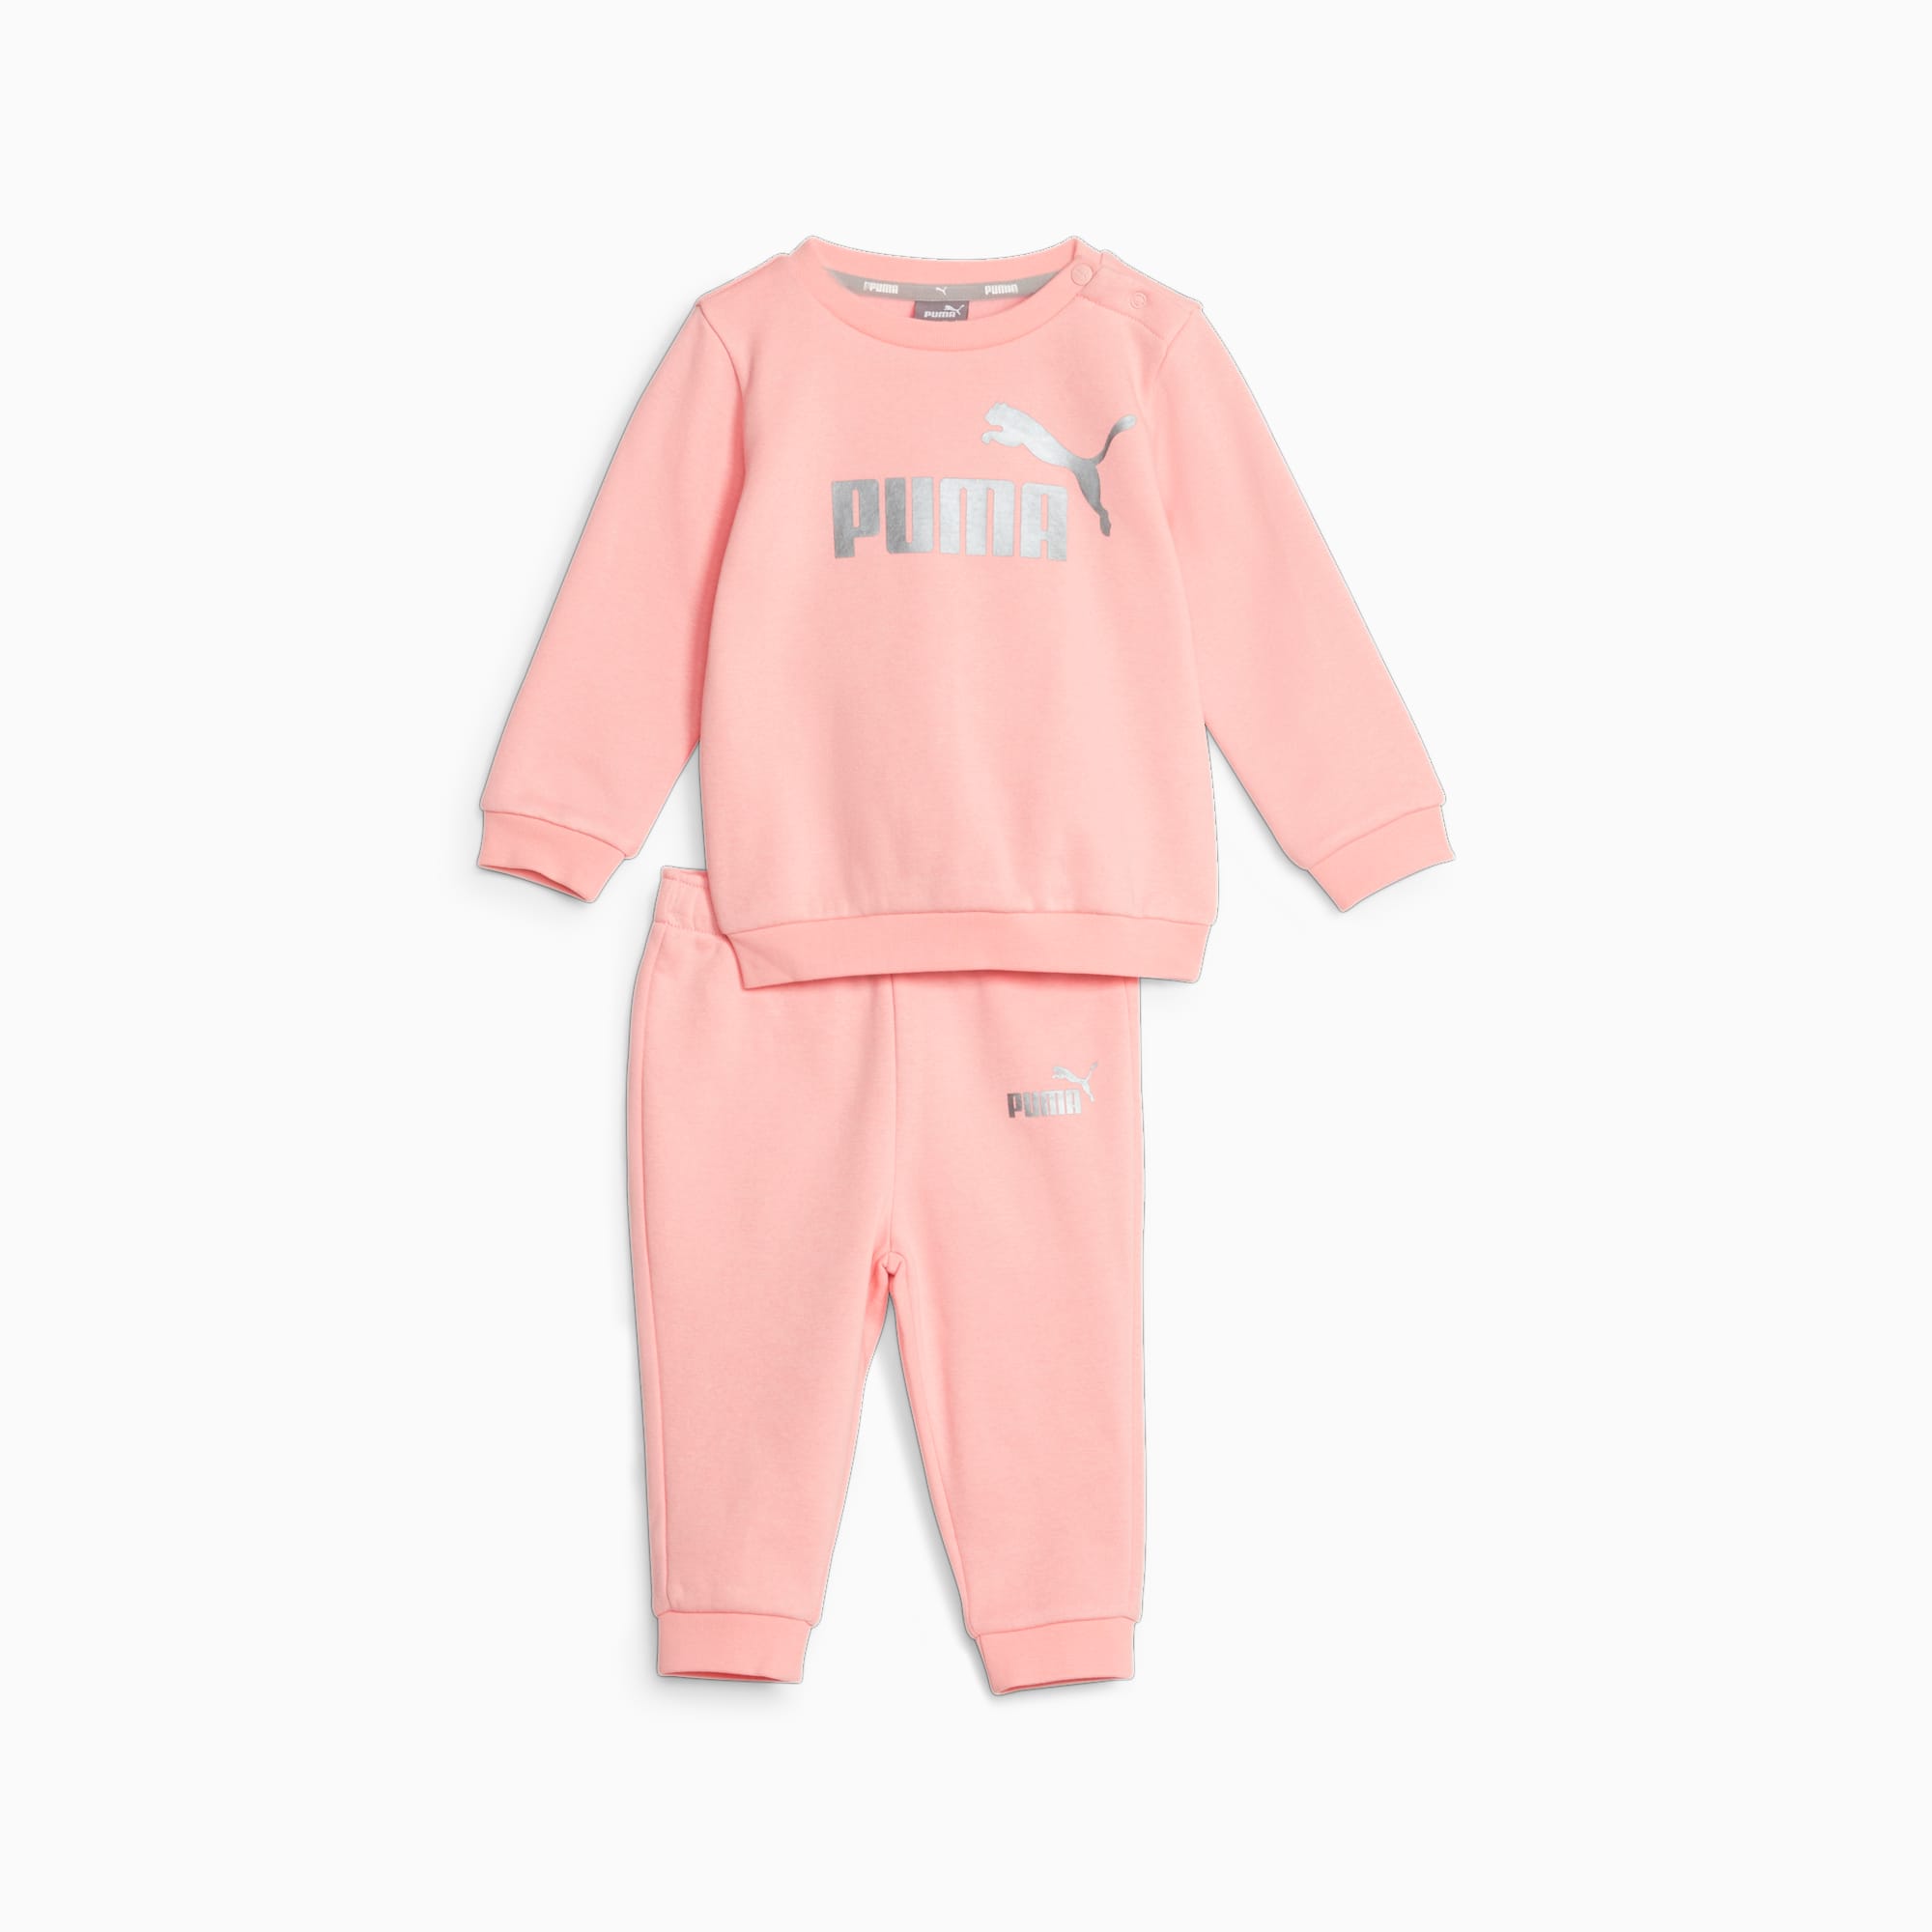 PUMA Minicats Ess+ Toddlers' Jogger, Peach Smoothie, Size 62